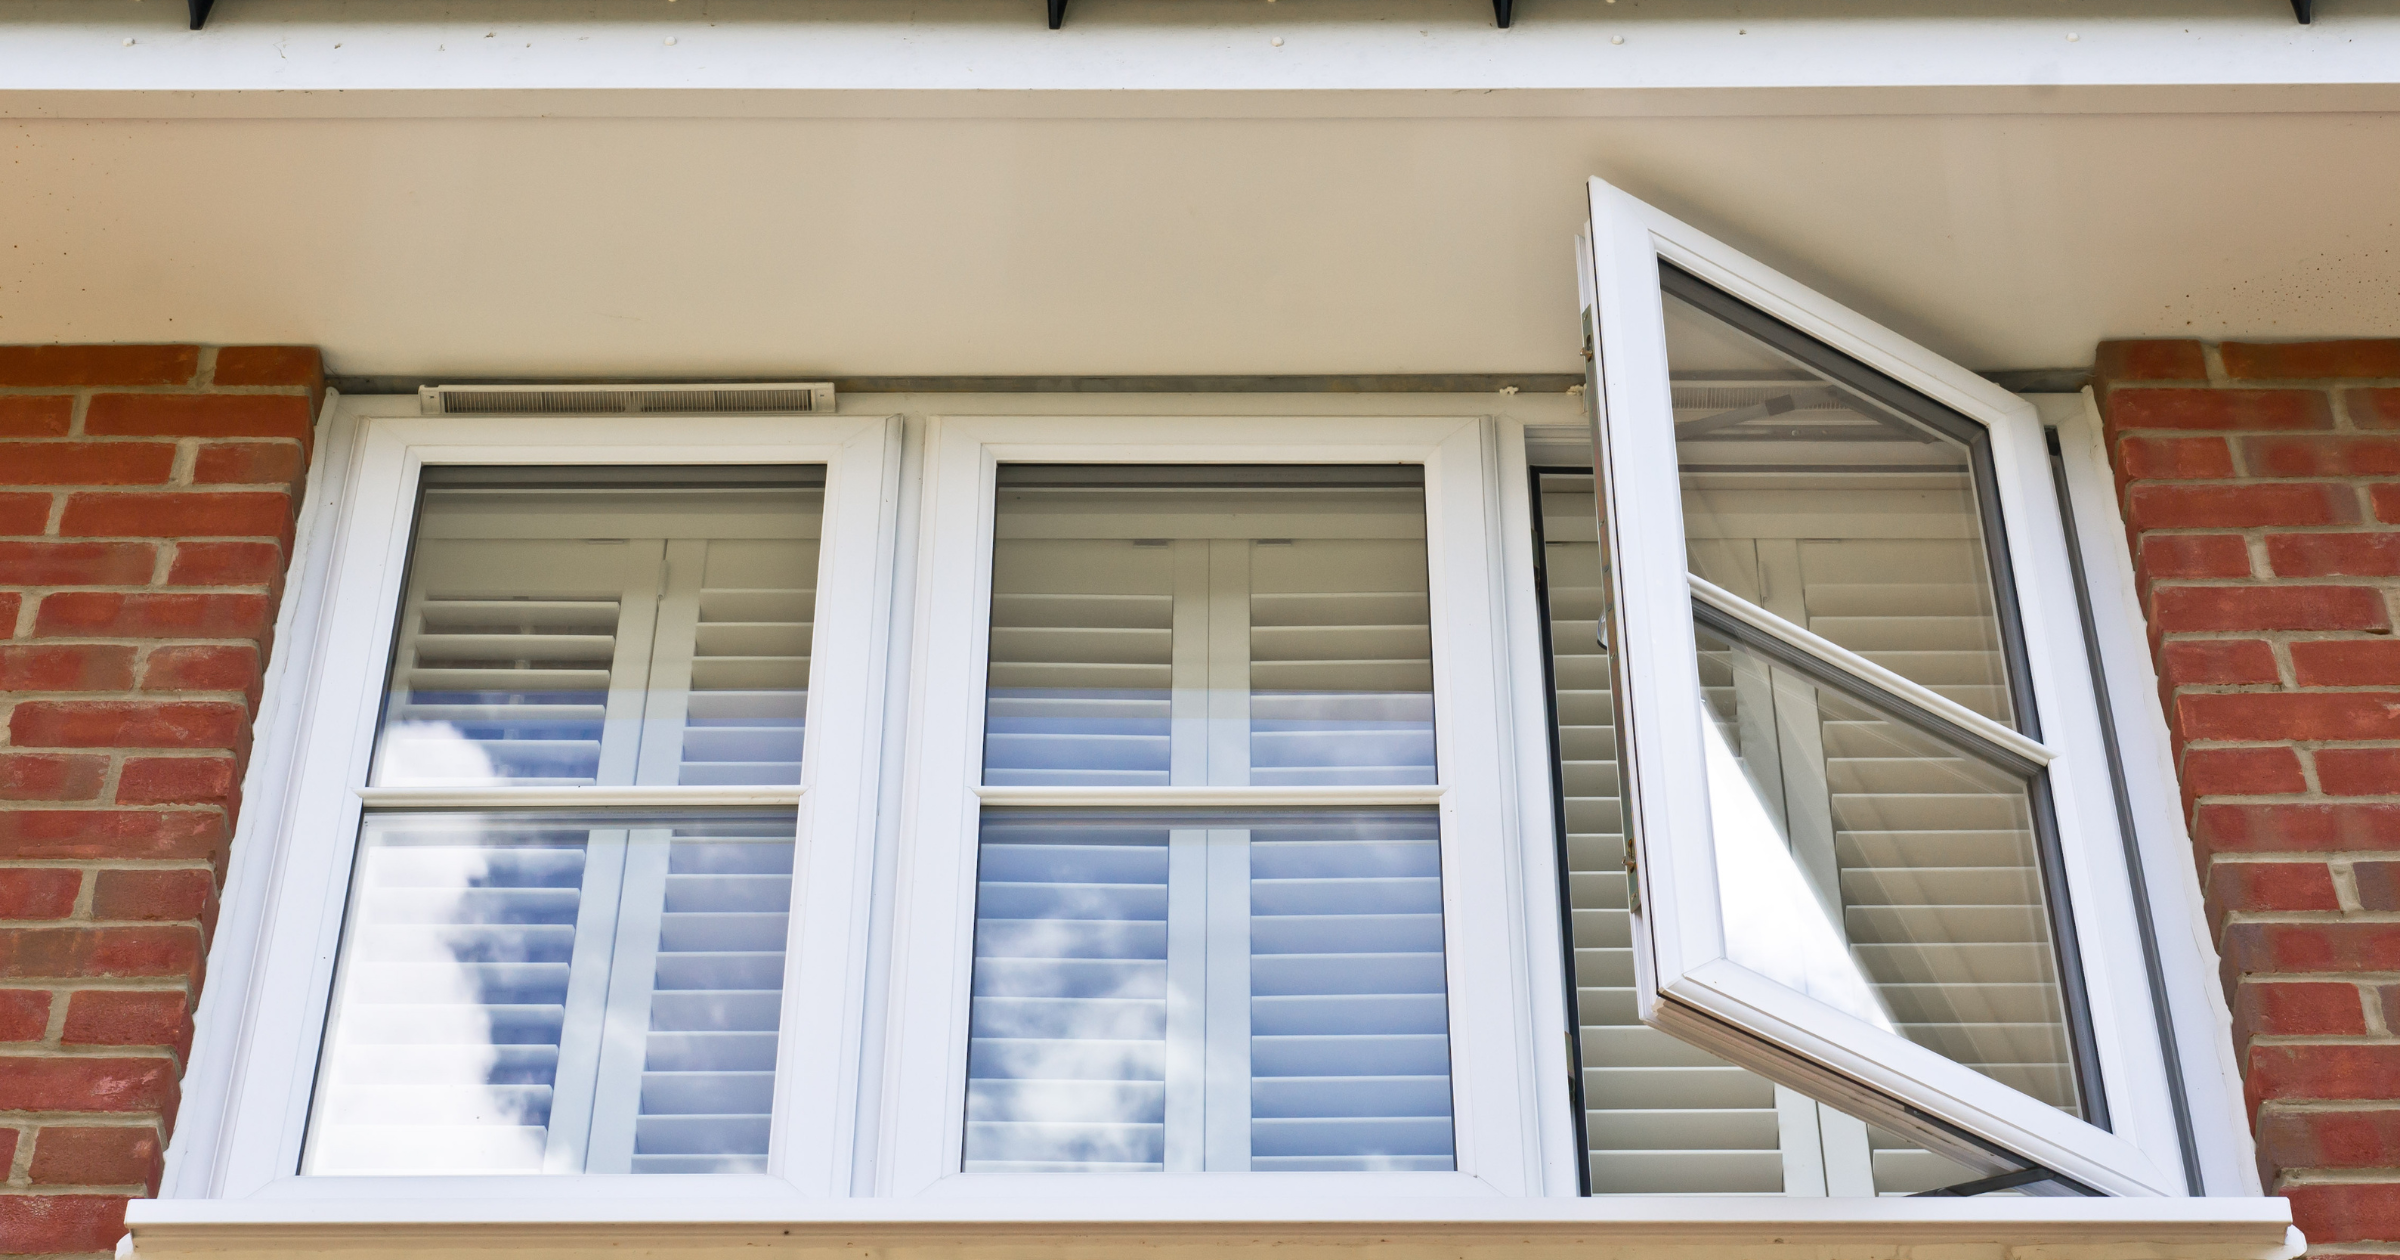 A stock image of a set of windows - start your property search on Share to Buy! 